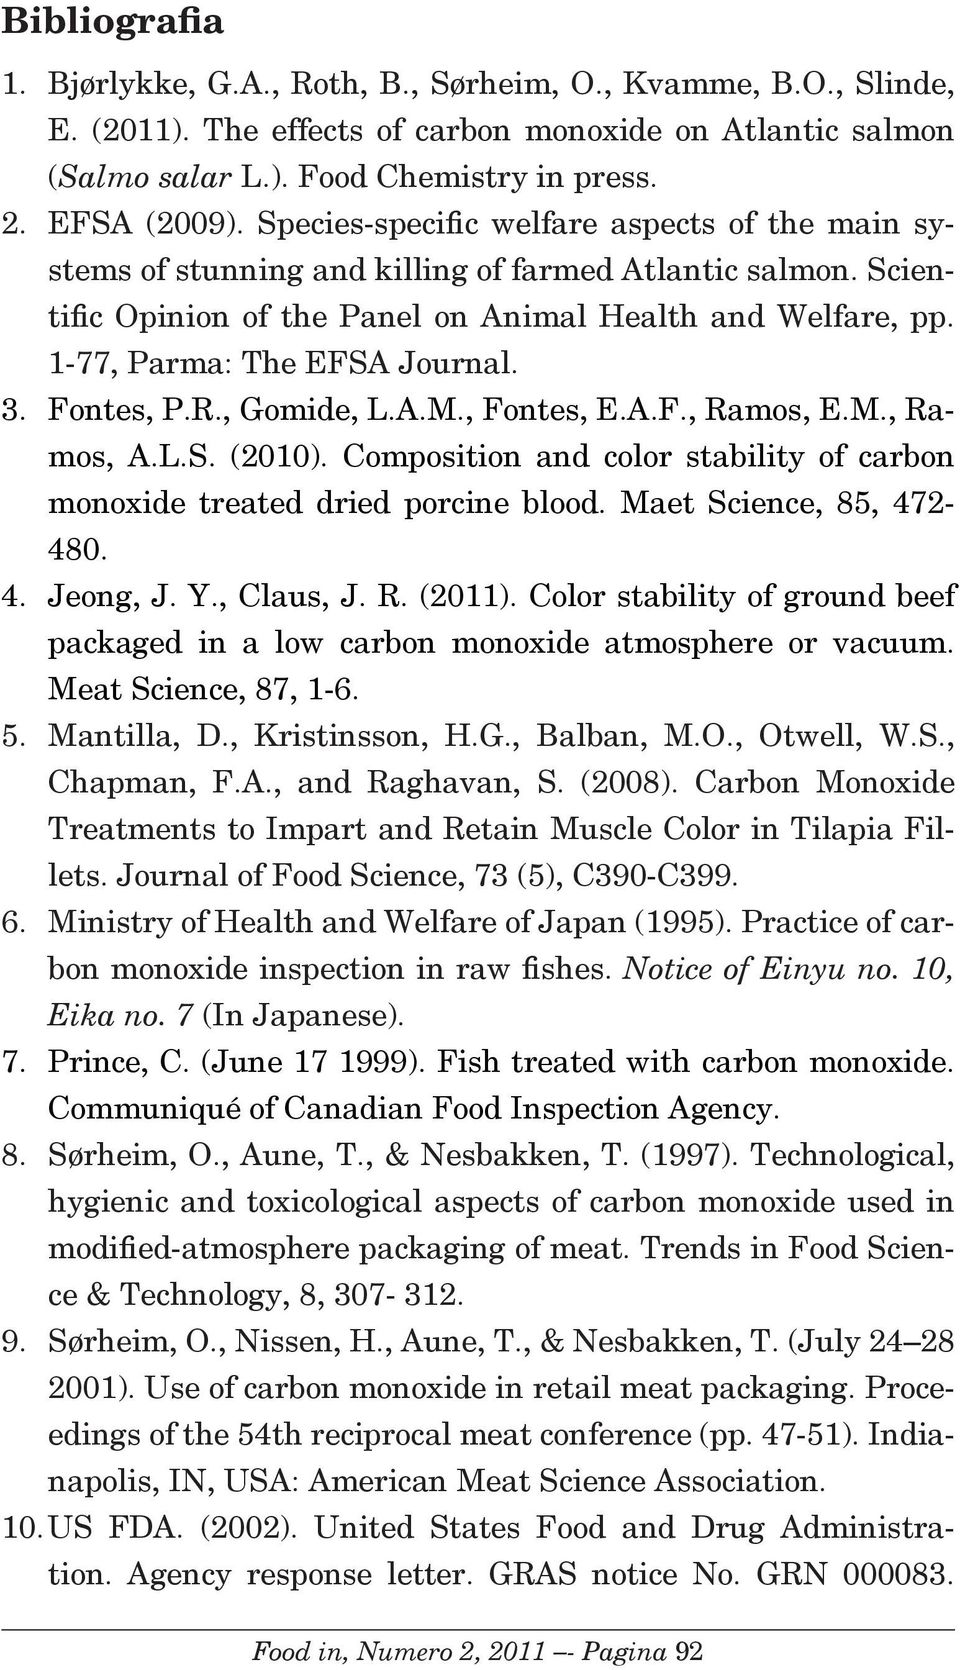 3. Fontes, P.R., Gomide, L.A.M., Fontes, E.A.F., Ramos, E.M., Ramos, A.L.S. (2010). Composition and color stability of carbon monoxide treated dried porcine blood. Maet Science, 85, 472-480. 4. Jeong, J.